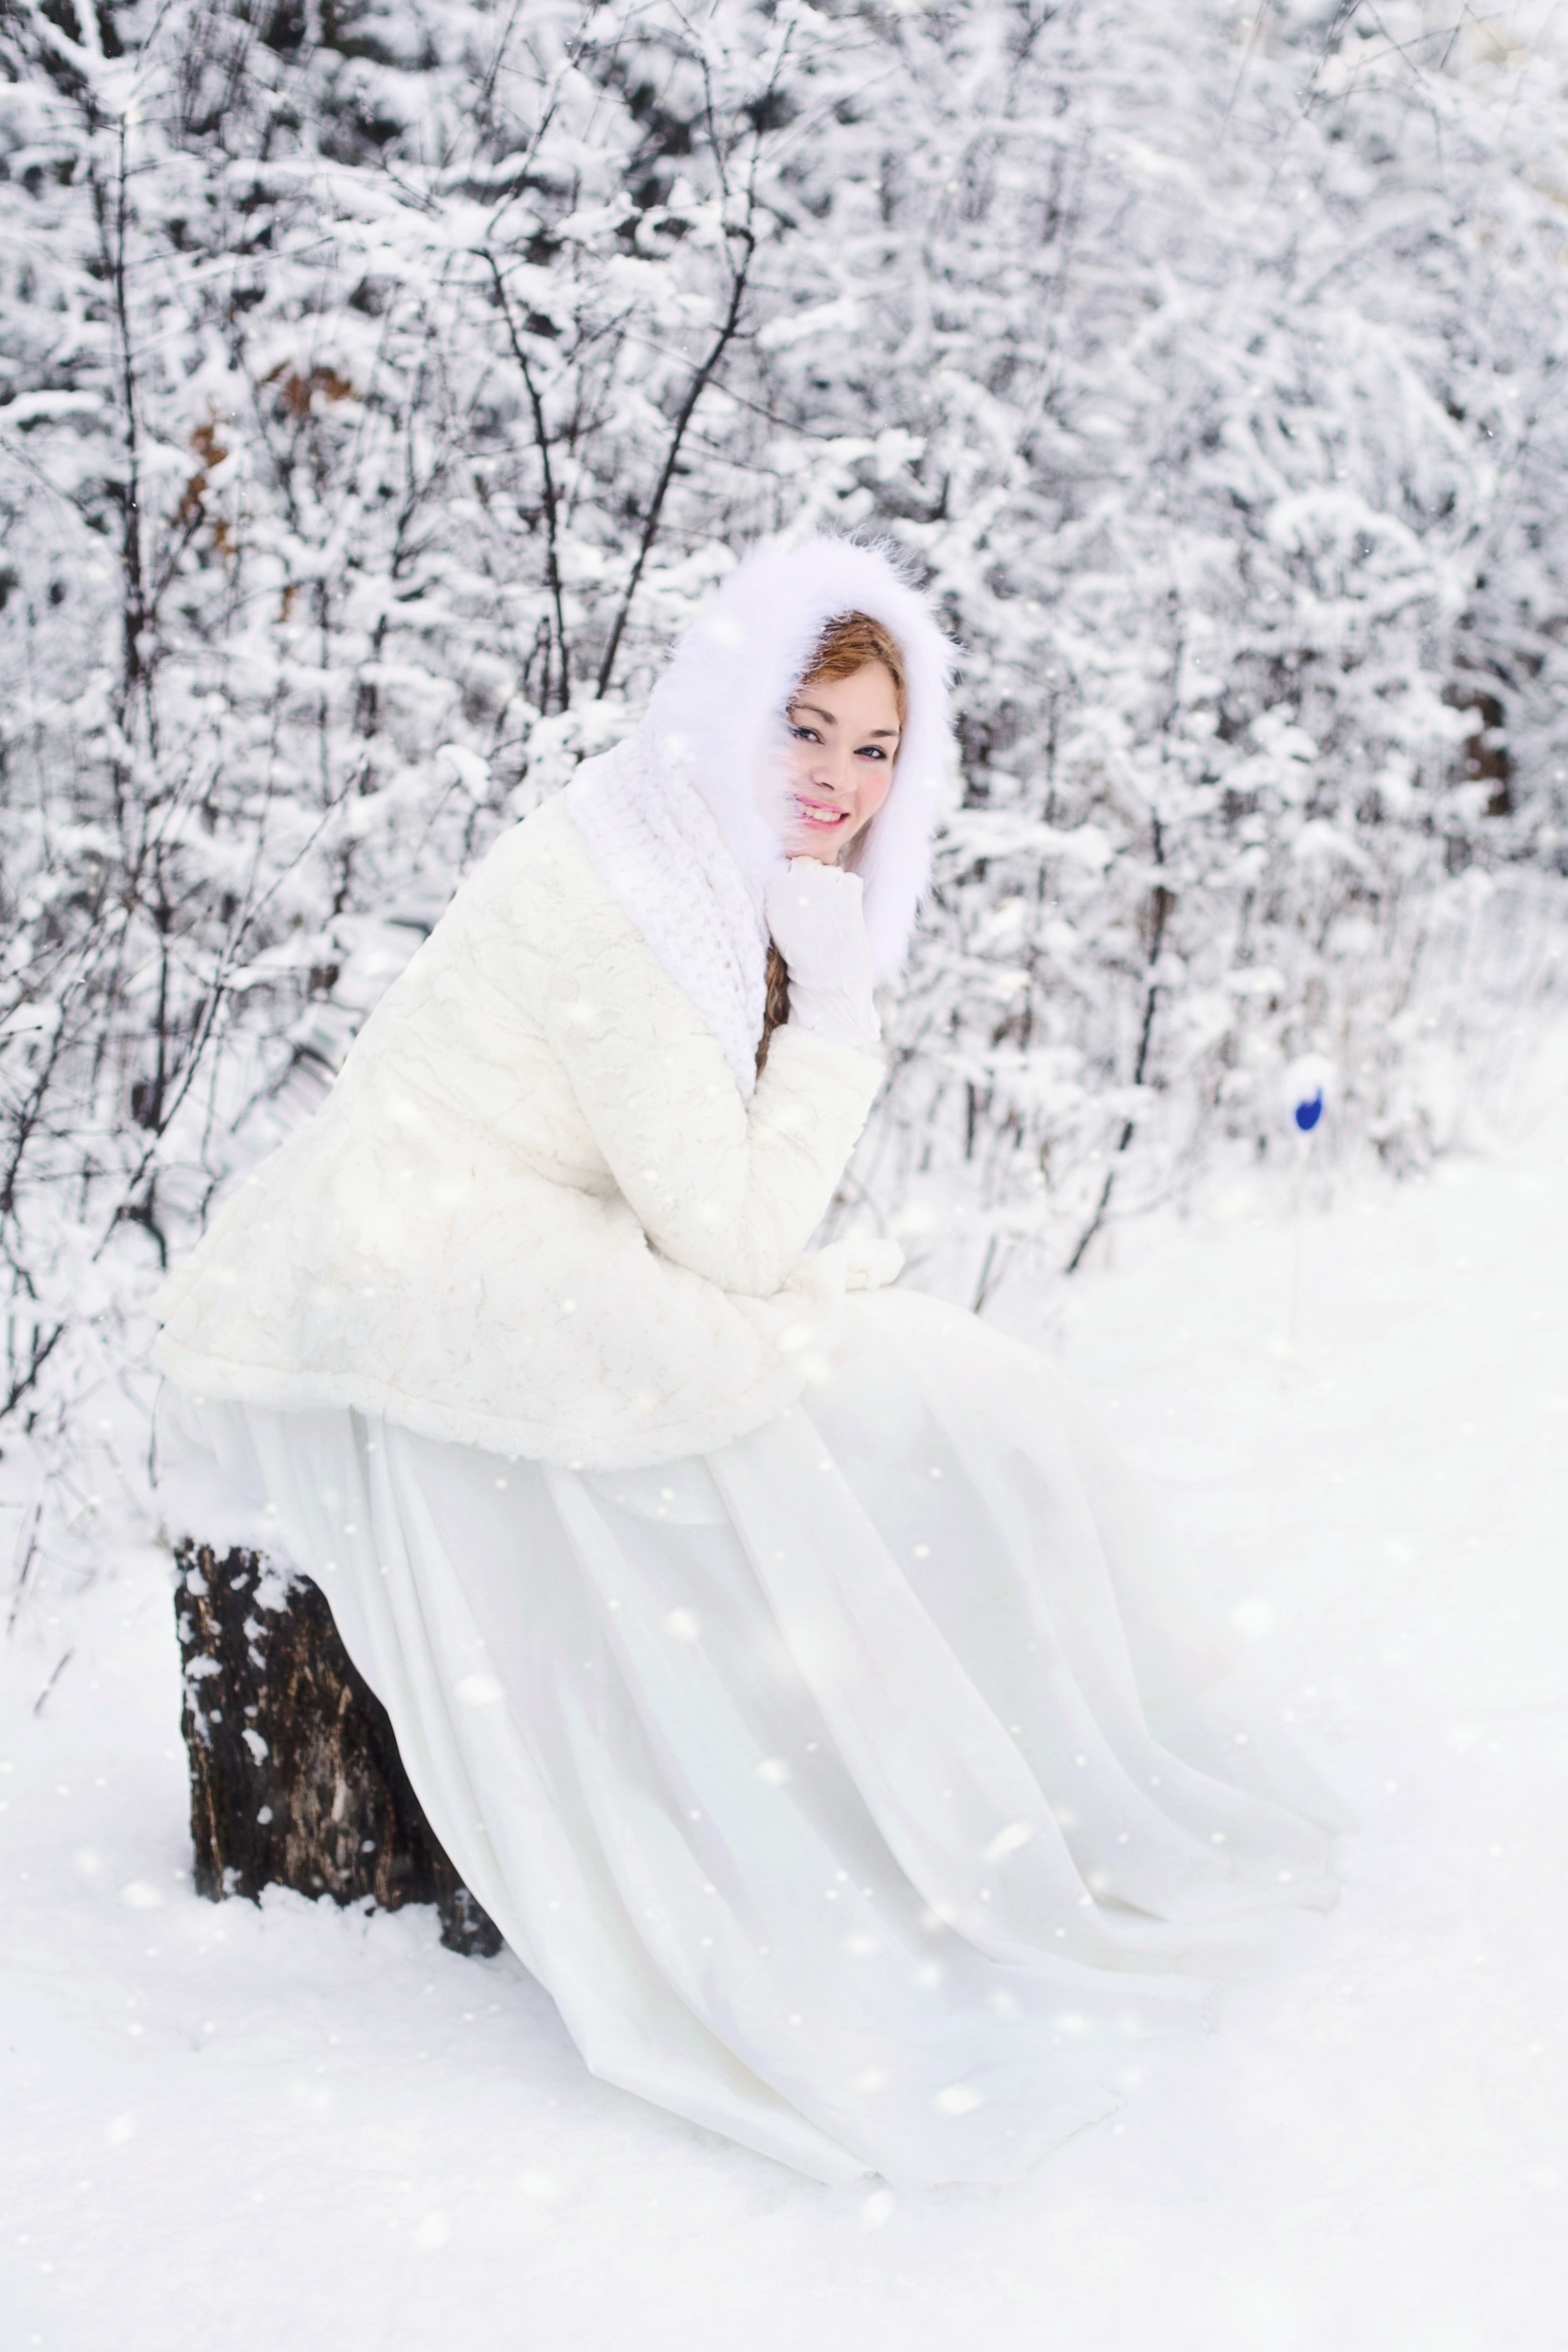 Woman in white fur hooded dress in white snow filed photo